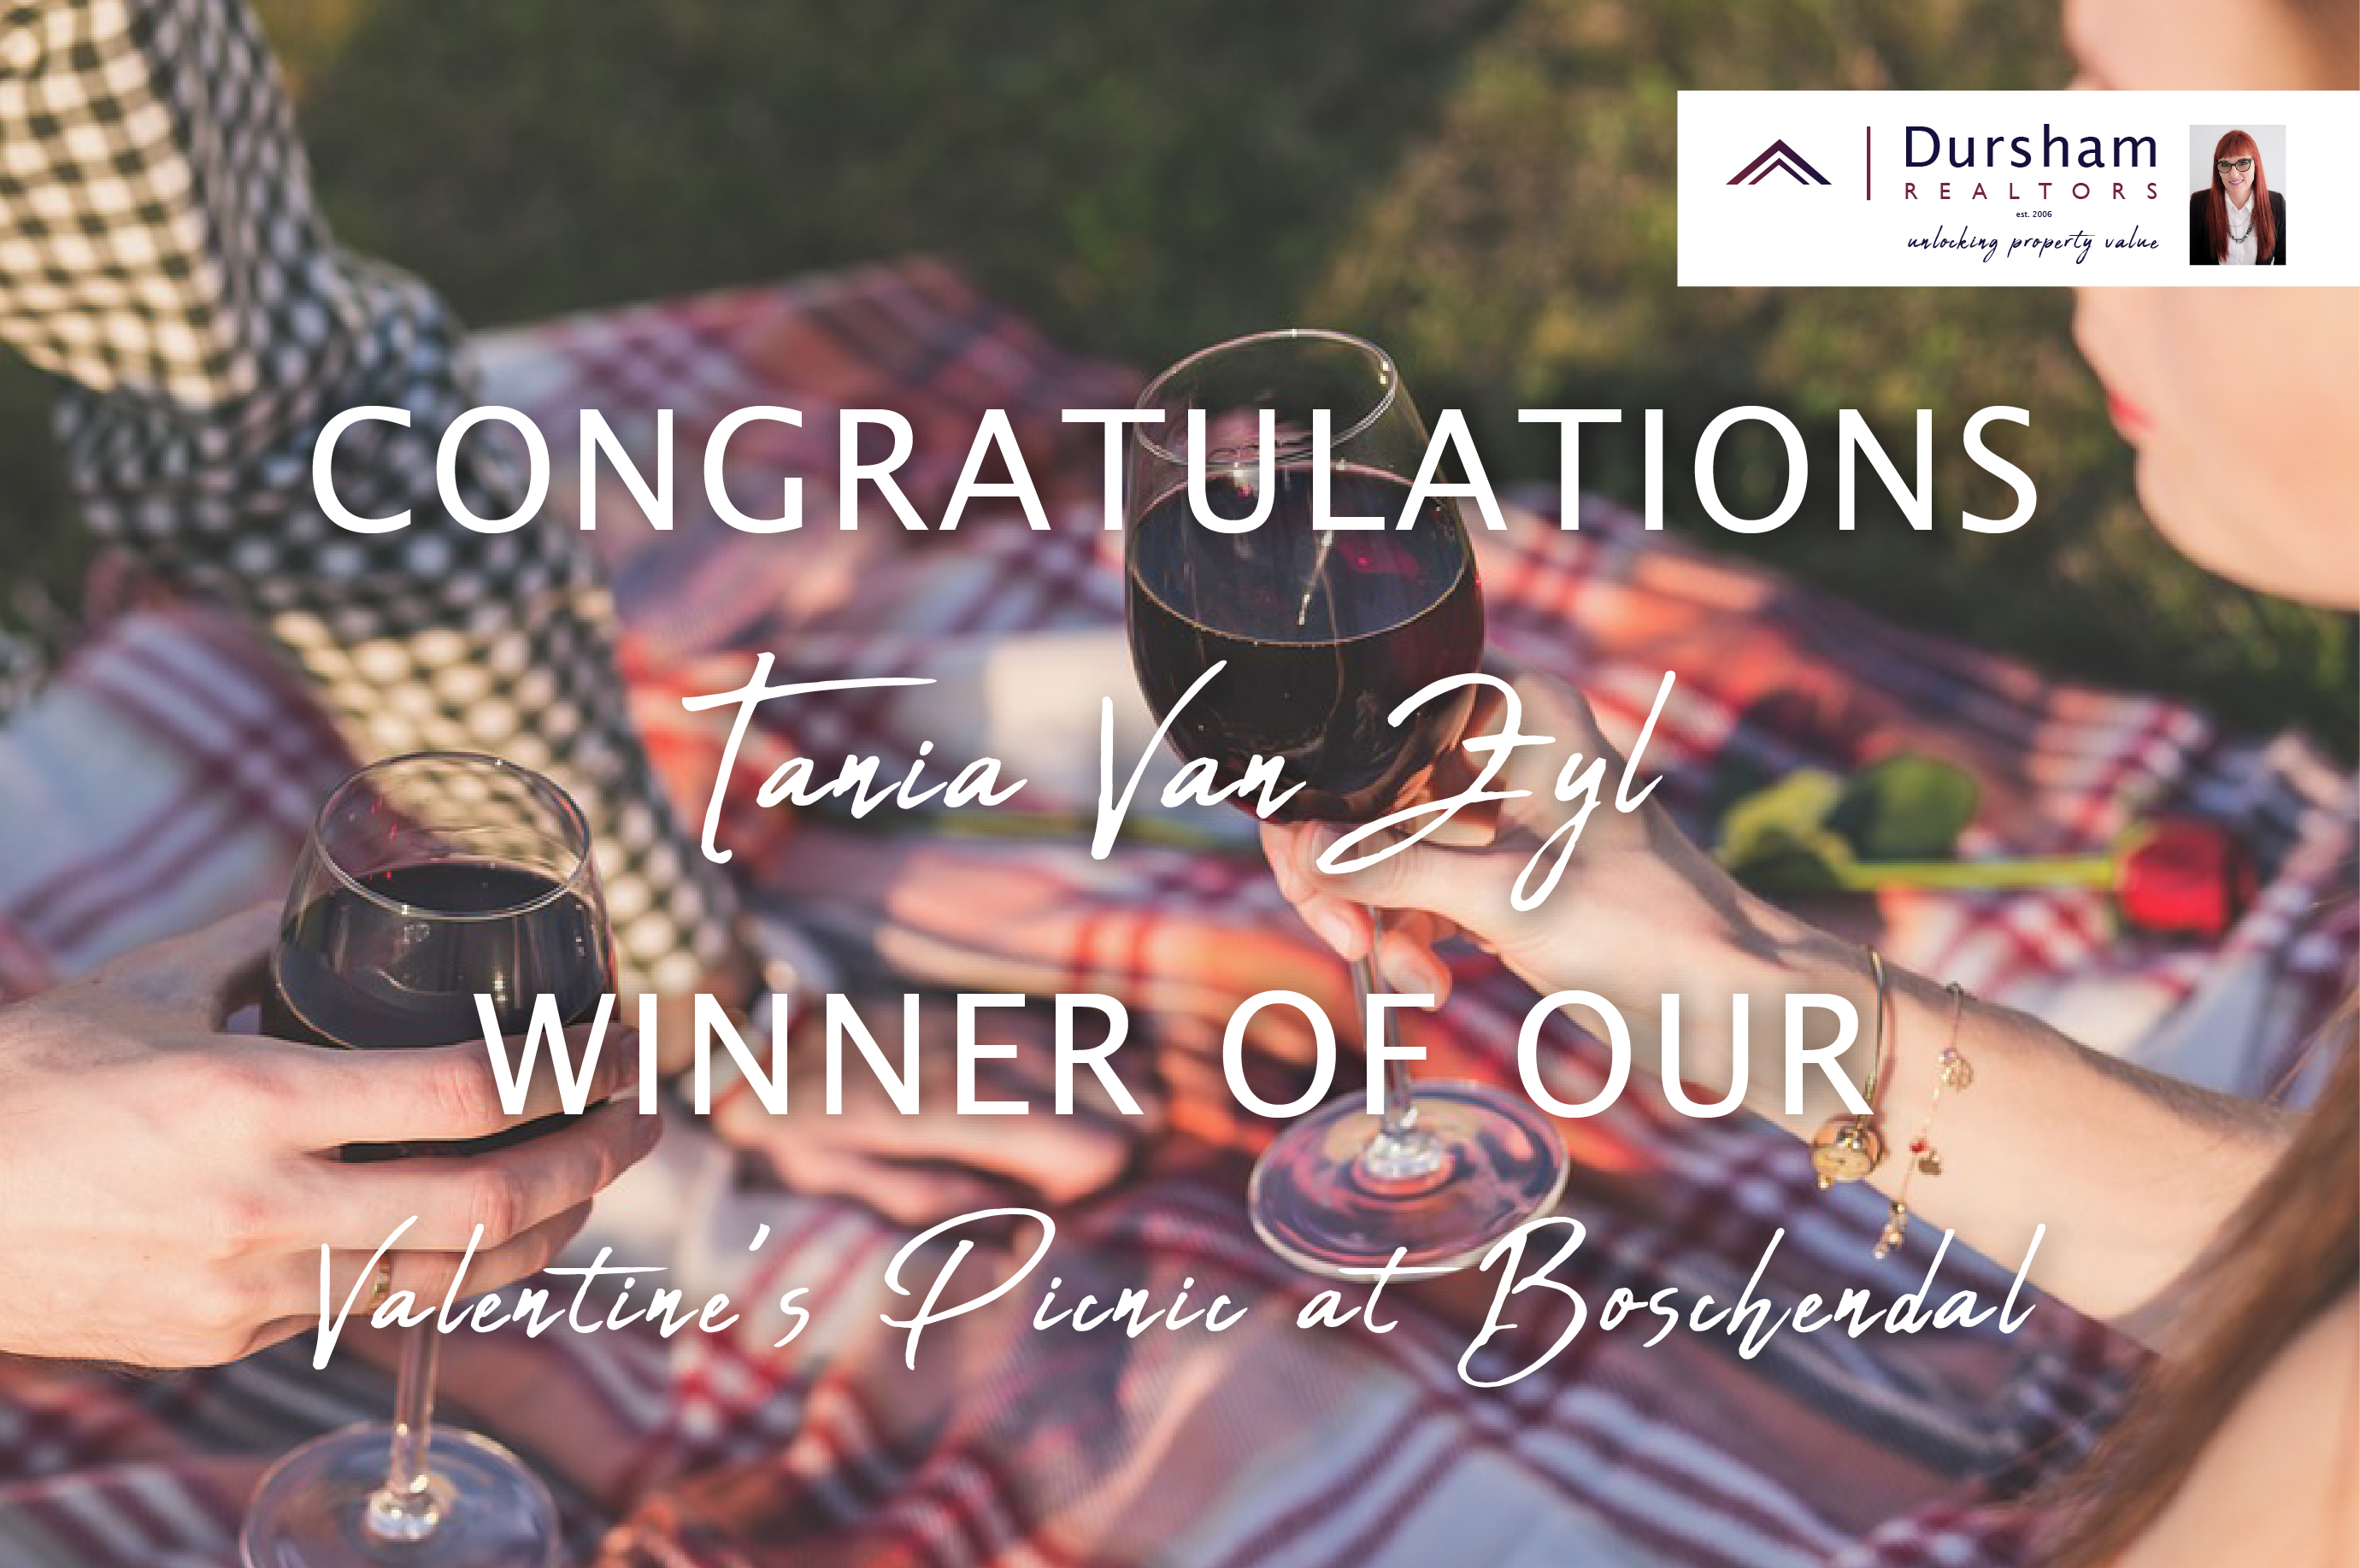 Tania van Zyl is the winner of our Valetine's Picnic at Boschendal.